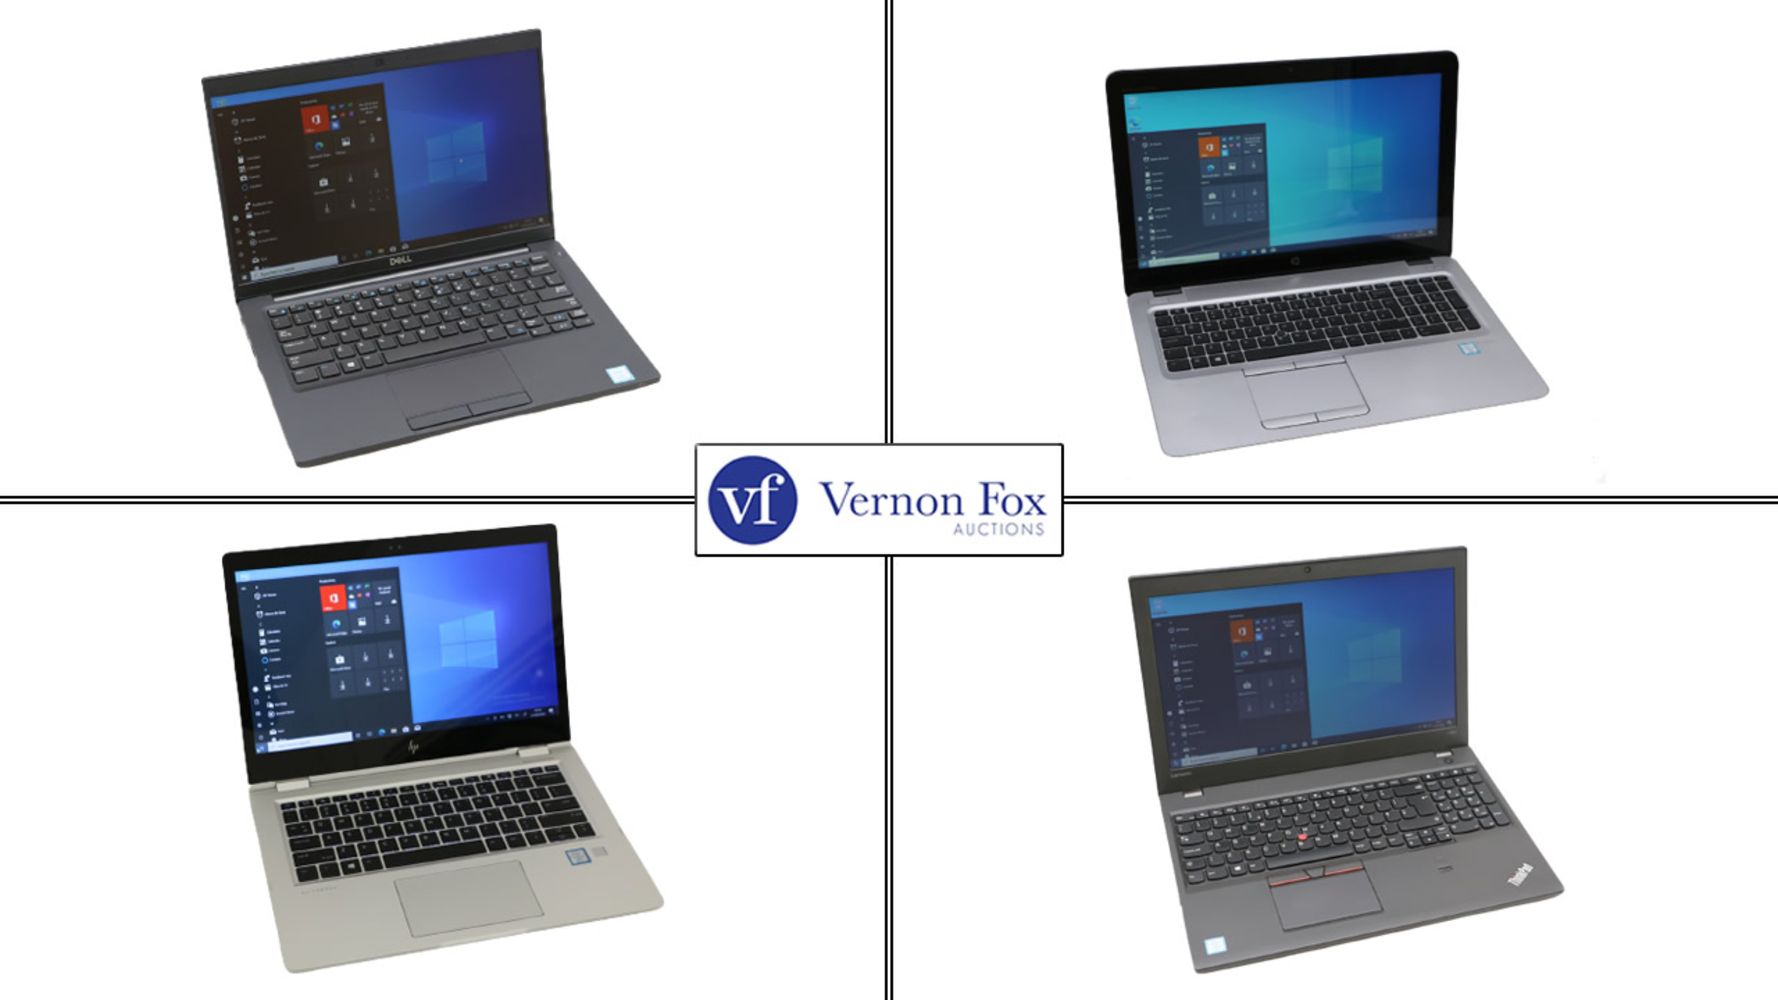 TIMED ONLINE AUCTION: The Laptop Sale, featuring New and Used Laptops, with FREE UK DELIVERY!